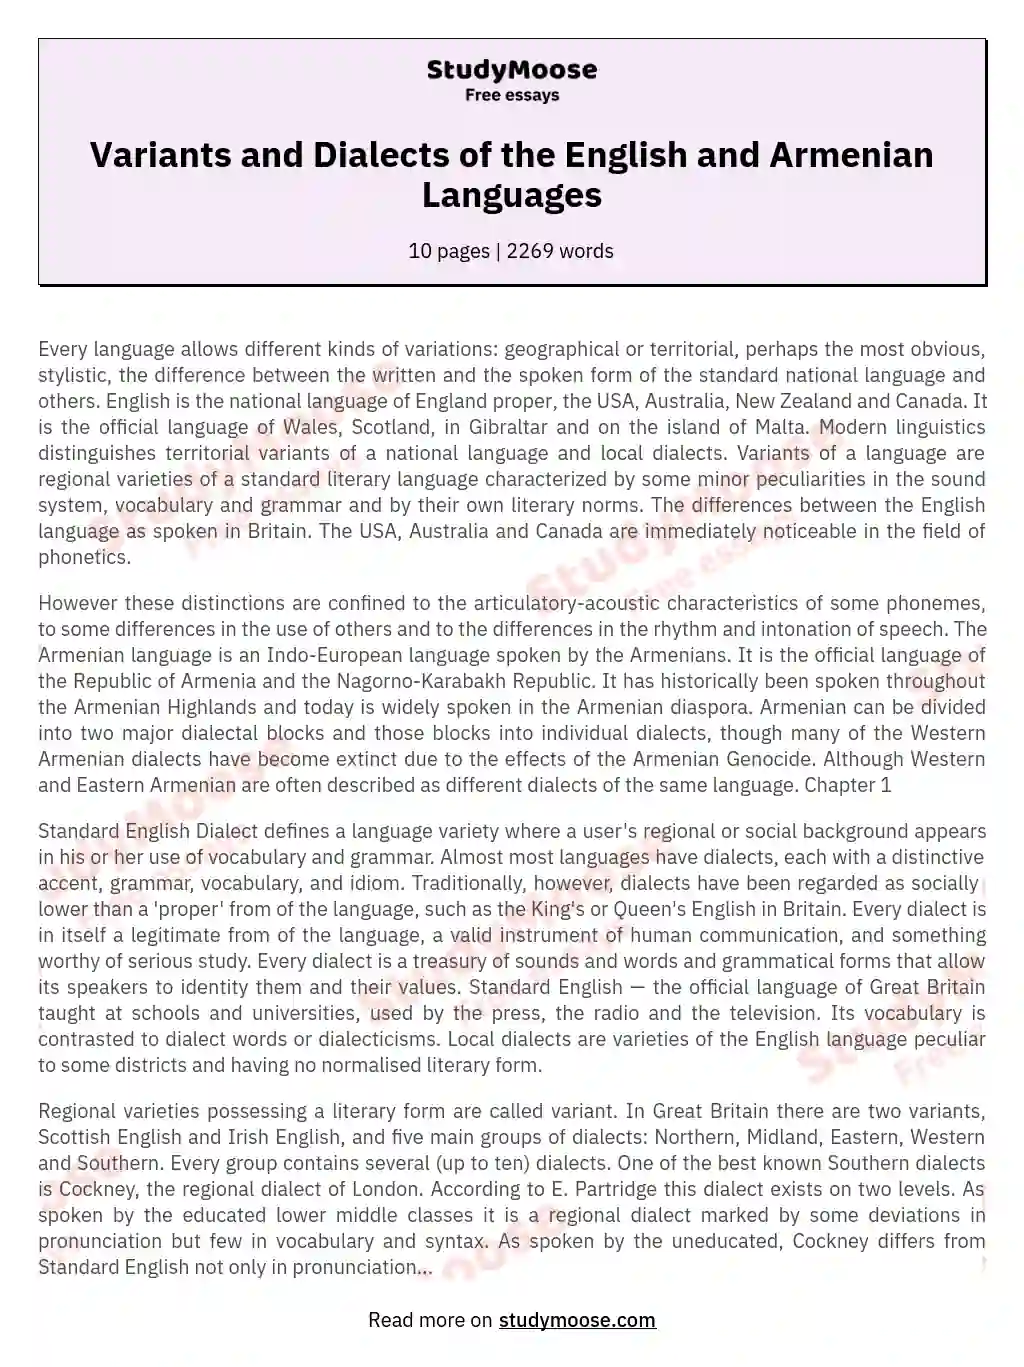 Variants and Dialects of the English and Armenian Languages essay